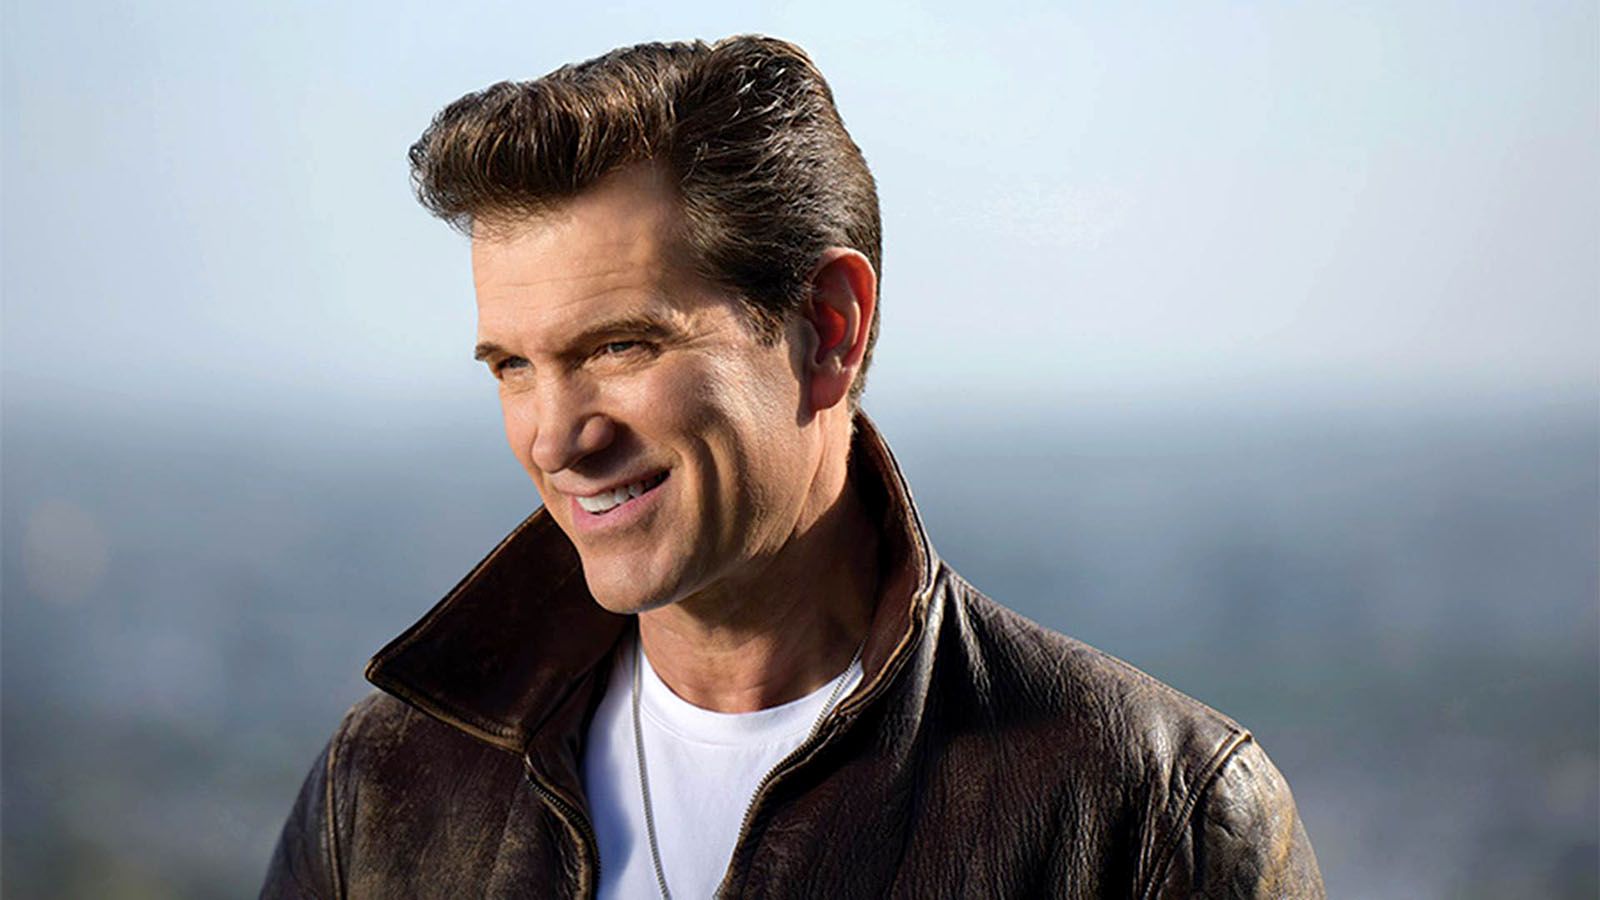 Chris Isaak will be at Embassy Theatre on July 16.